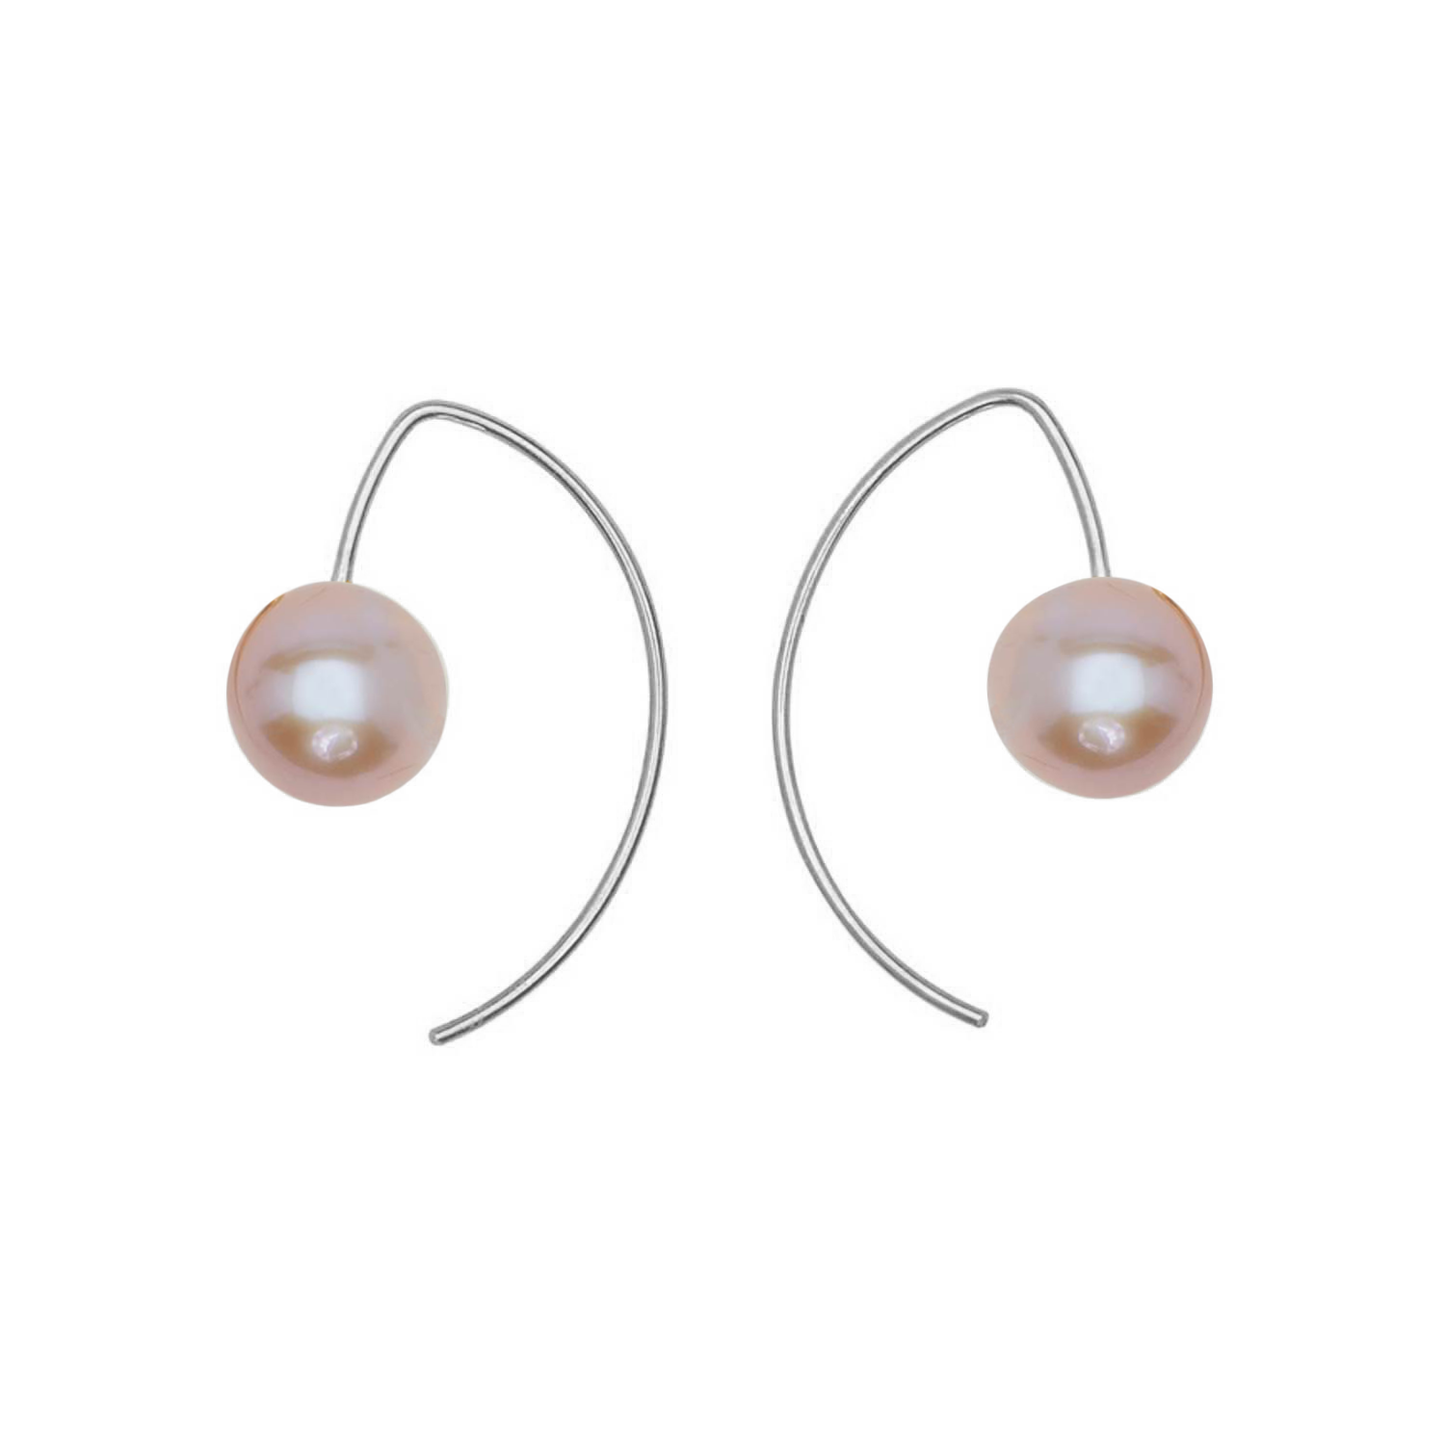 Lobe Huggers, Short Curve Earrings with White Pearls